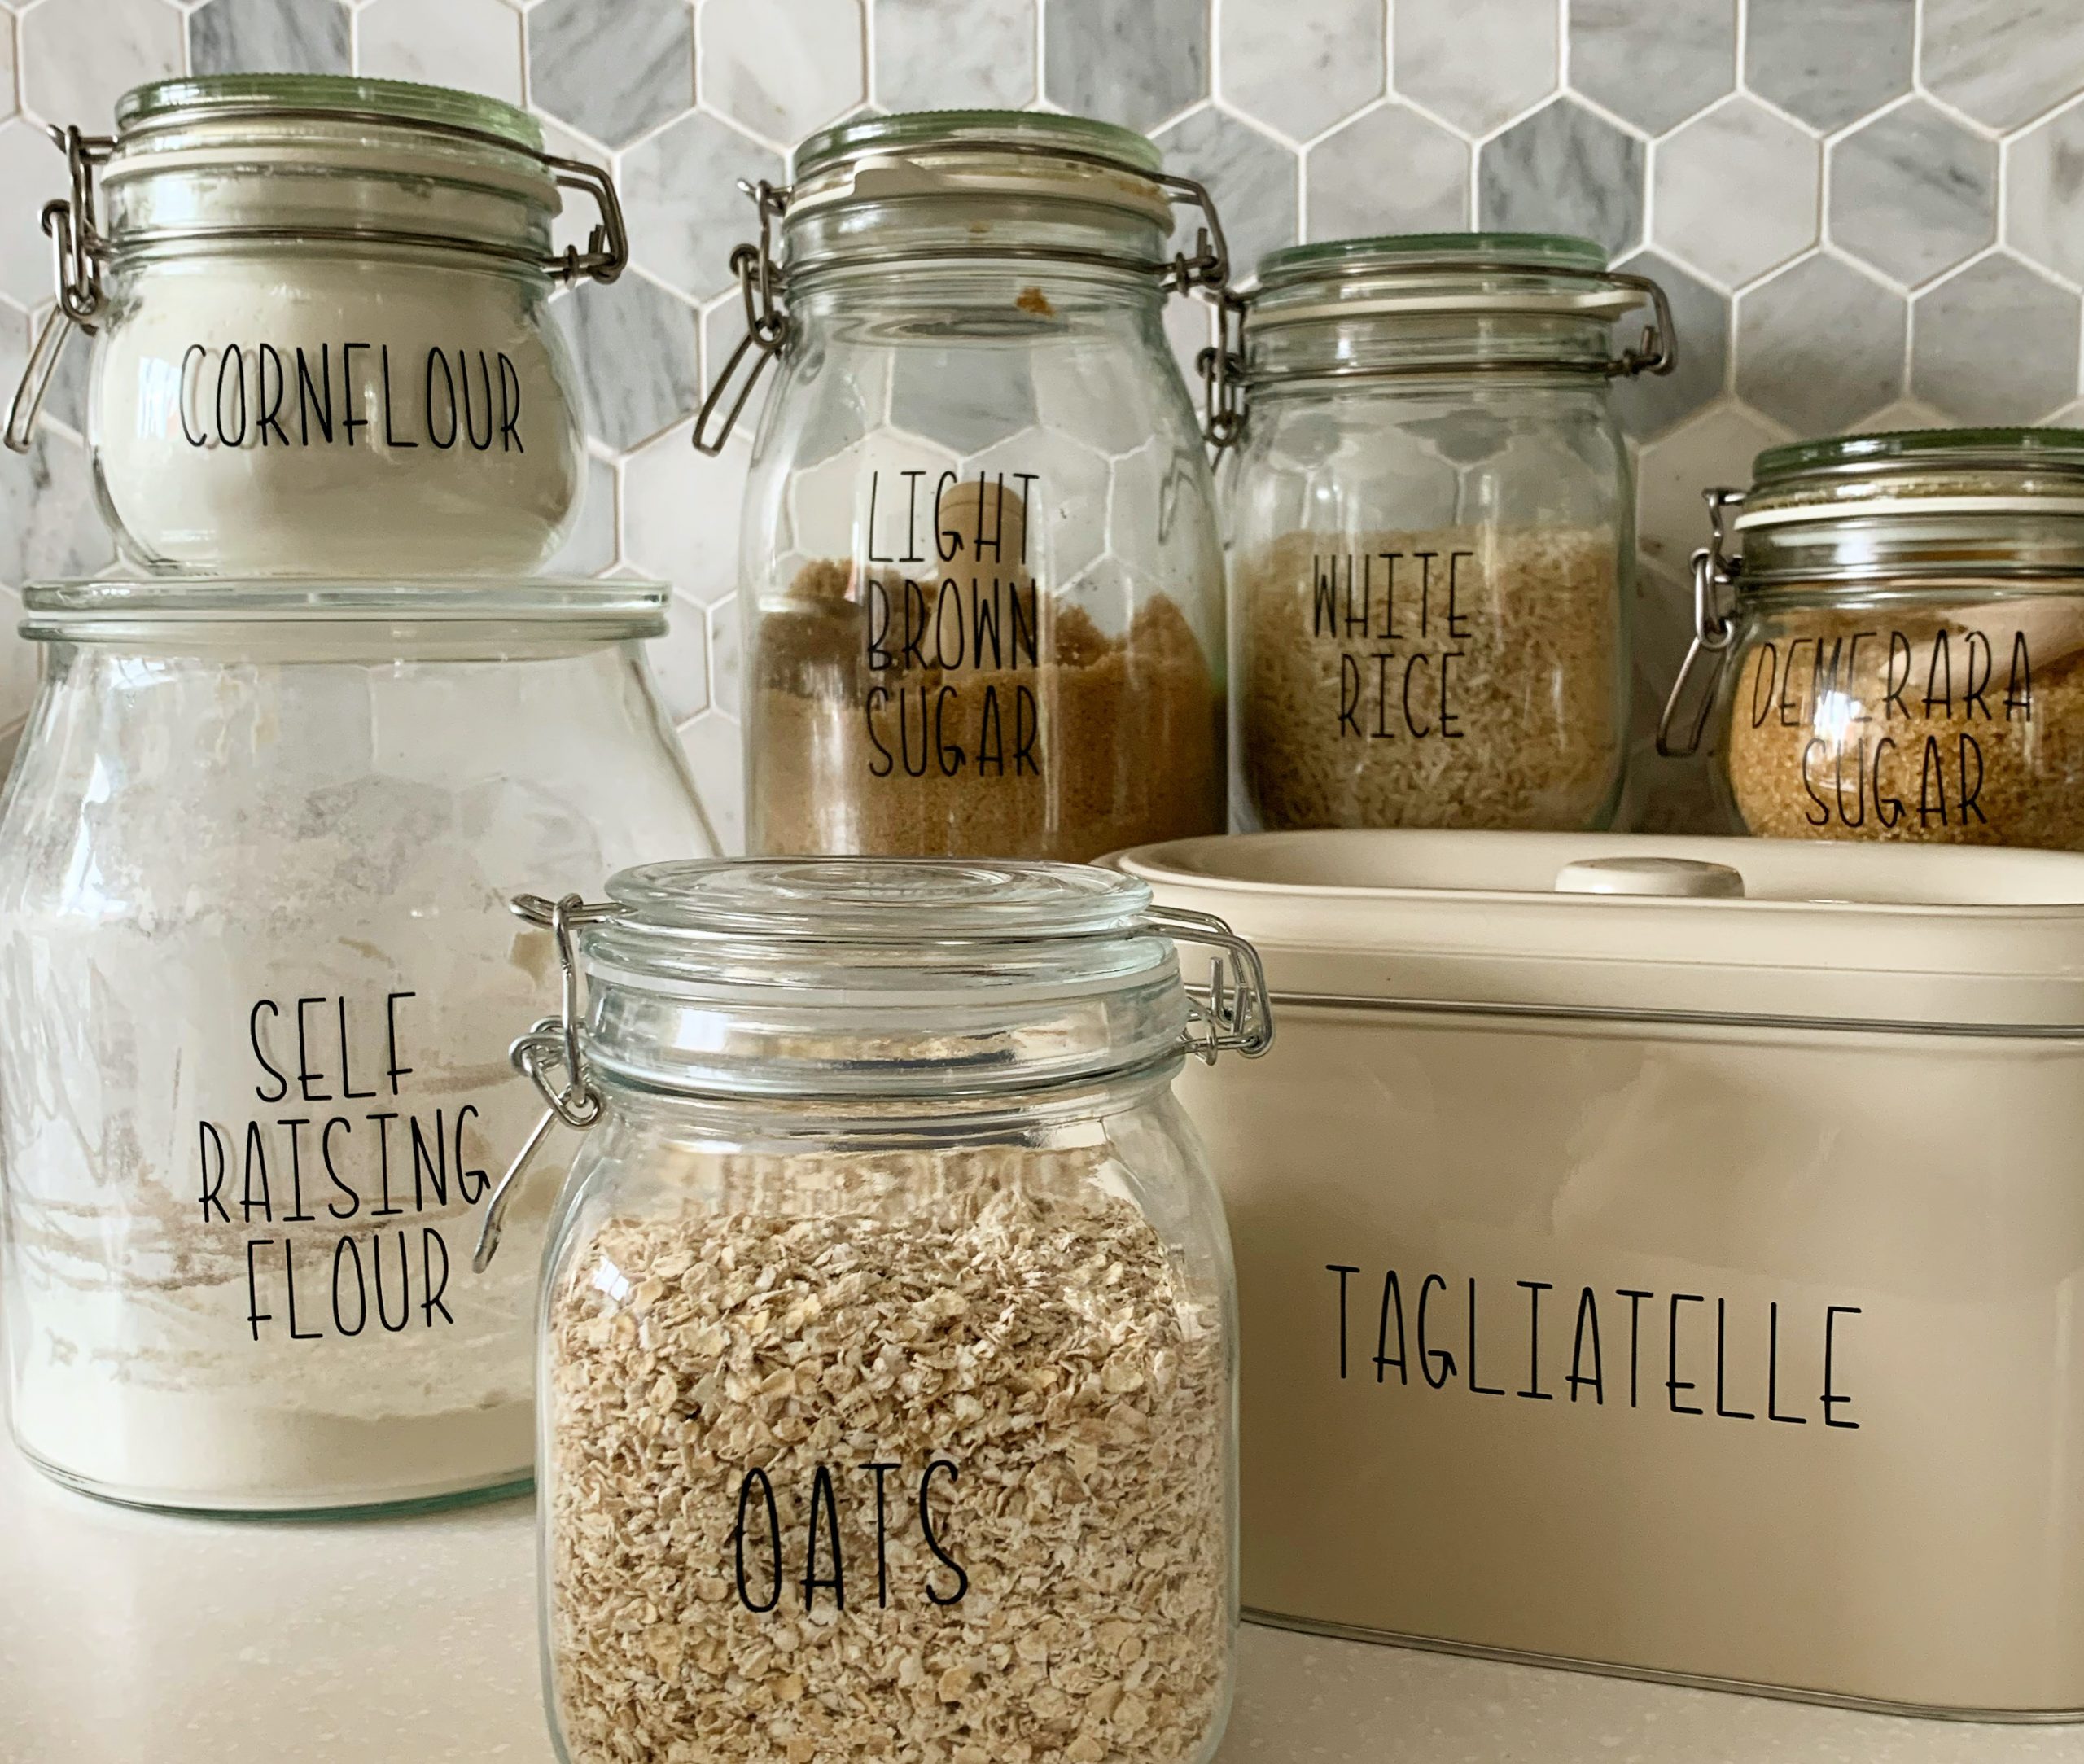 How to create an organised home - Aisha from Hobbycraft shares her top tips